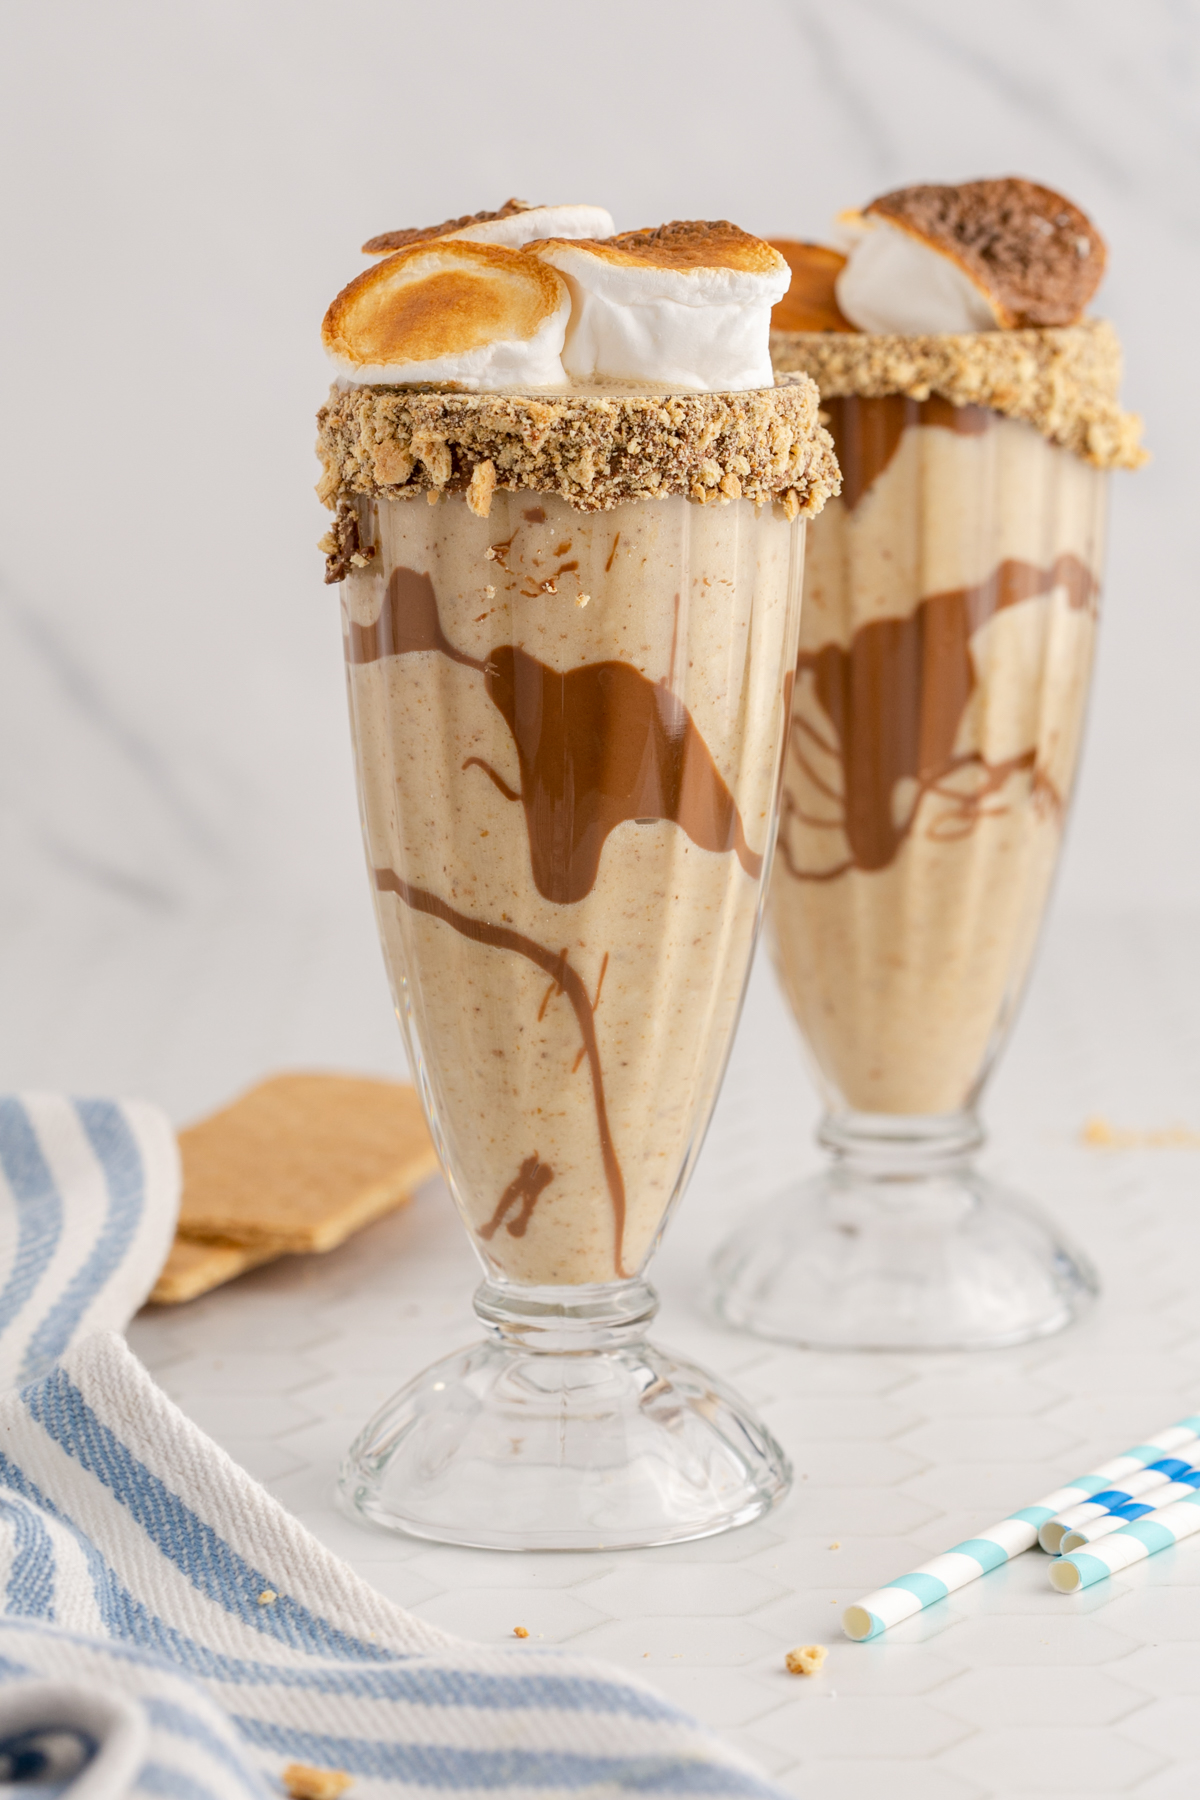 These creamy S’mores Milkshakes have all the flavors of campfire s’mores without the need to haul out the firepit! This recipe combines toasted marshmallows, vanilla ice cream, and your favorite chocolate bar with a glass rim coated in graham cracker crumbs. It’s the perfect way to celebrate the summer season! via @foodhussy